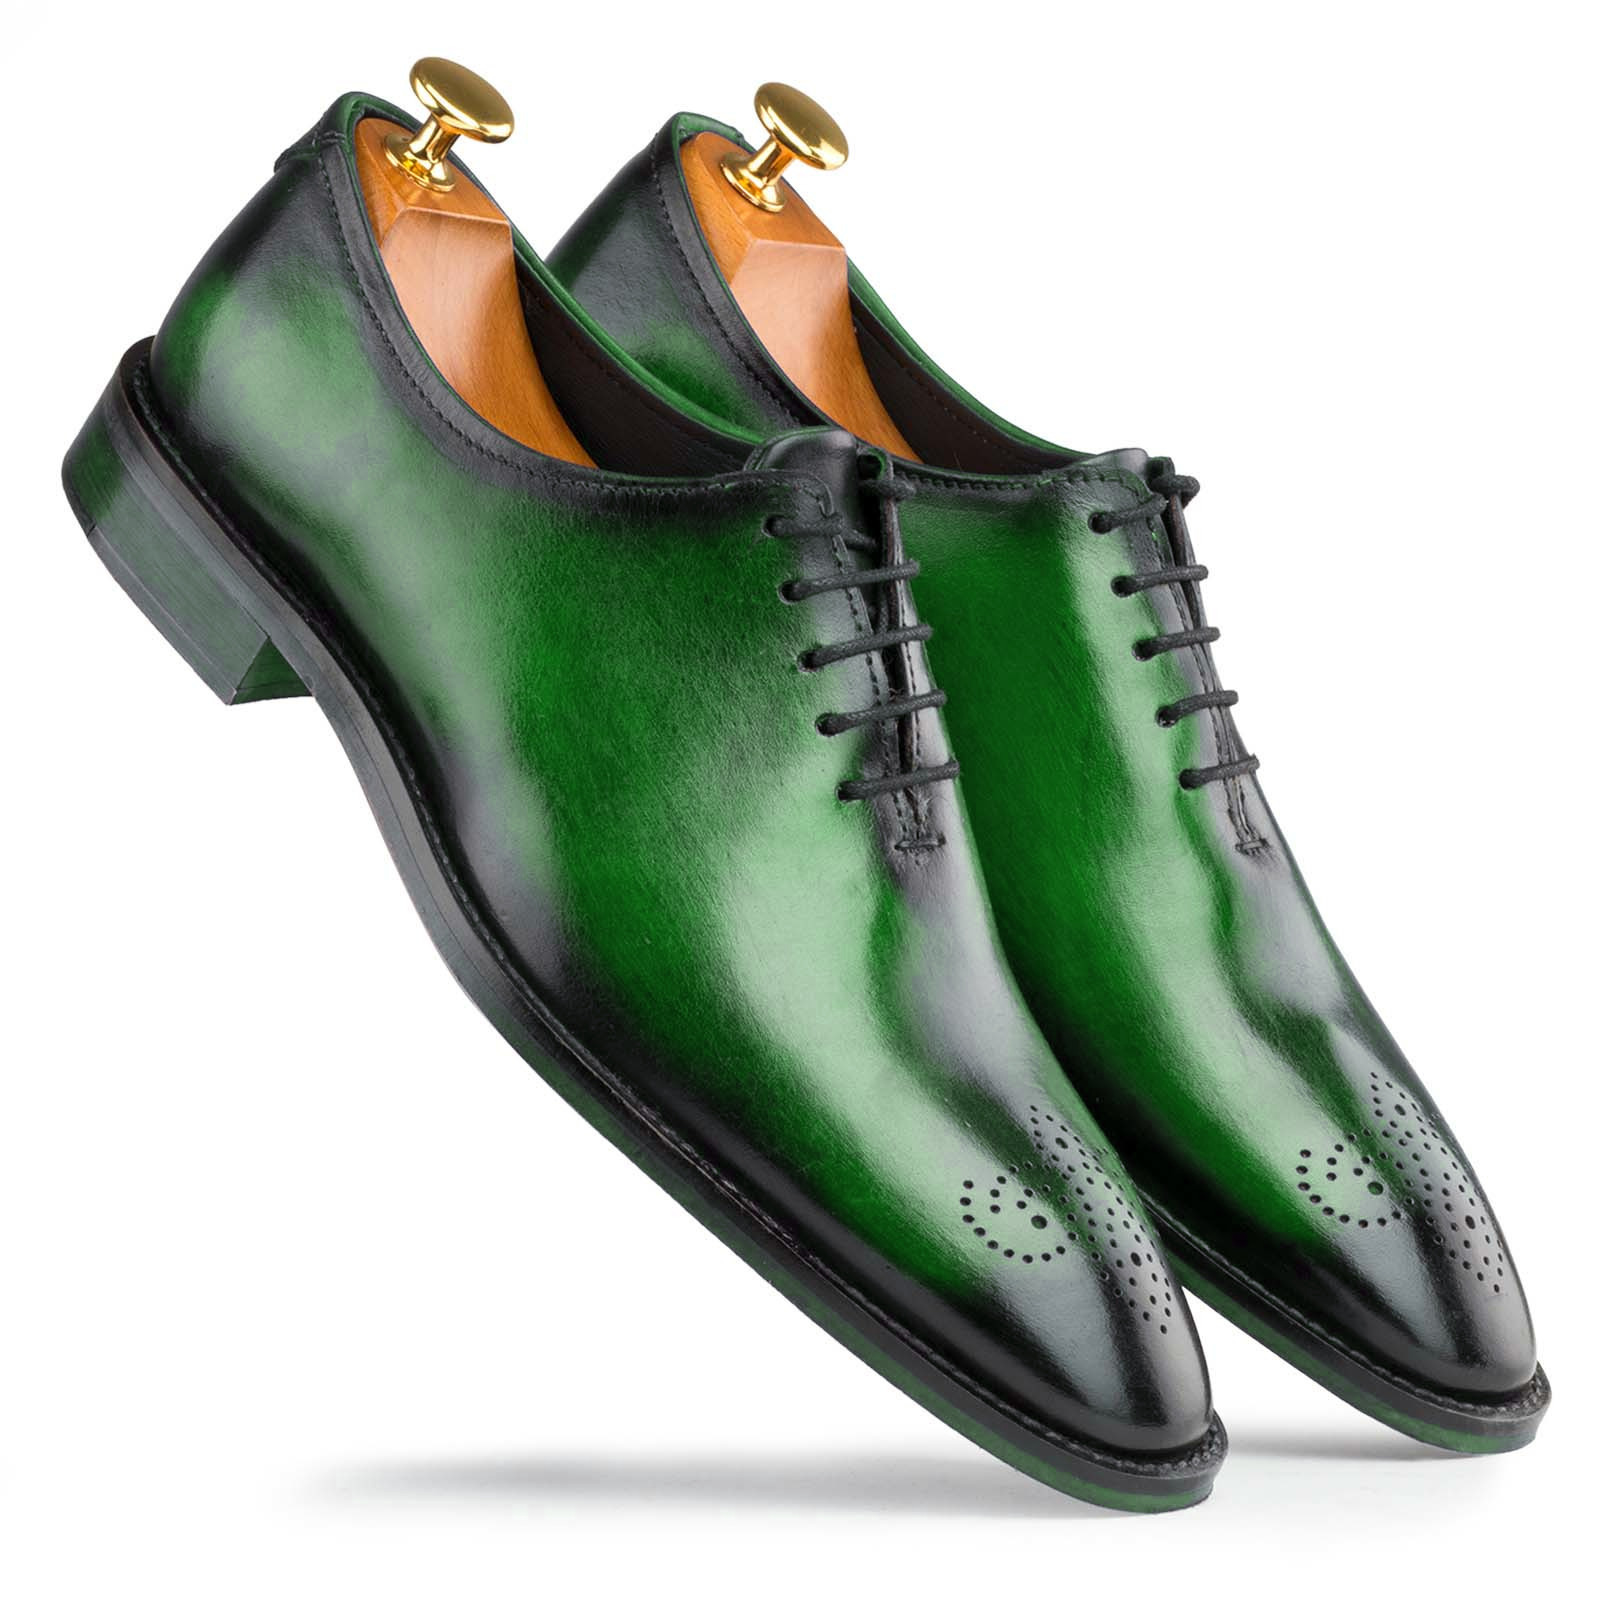 Green Burnished Brogues Toe Oxford Handmade Genuine Leather Men Lace Up Shoes